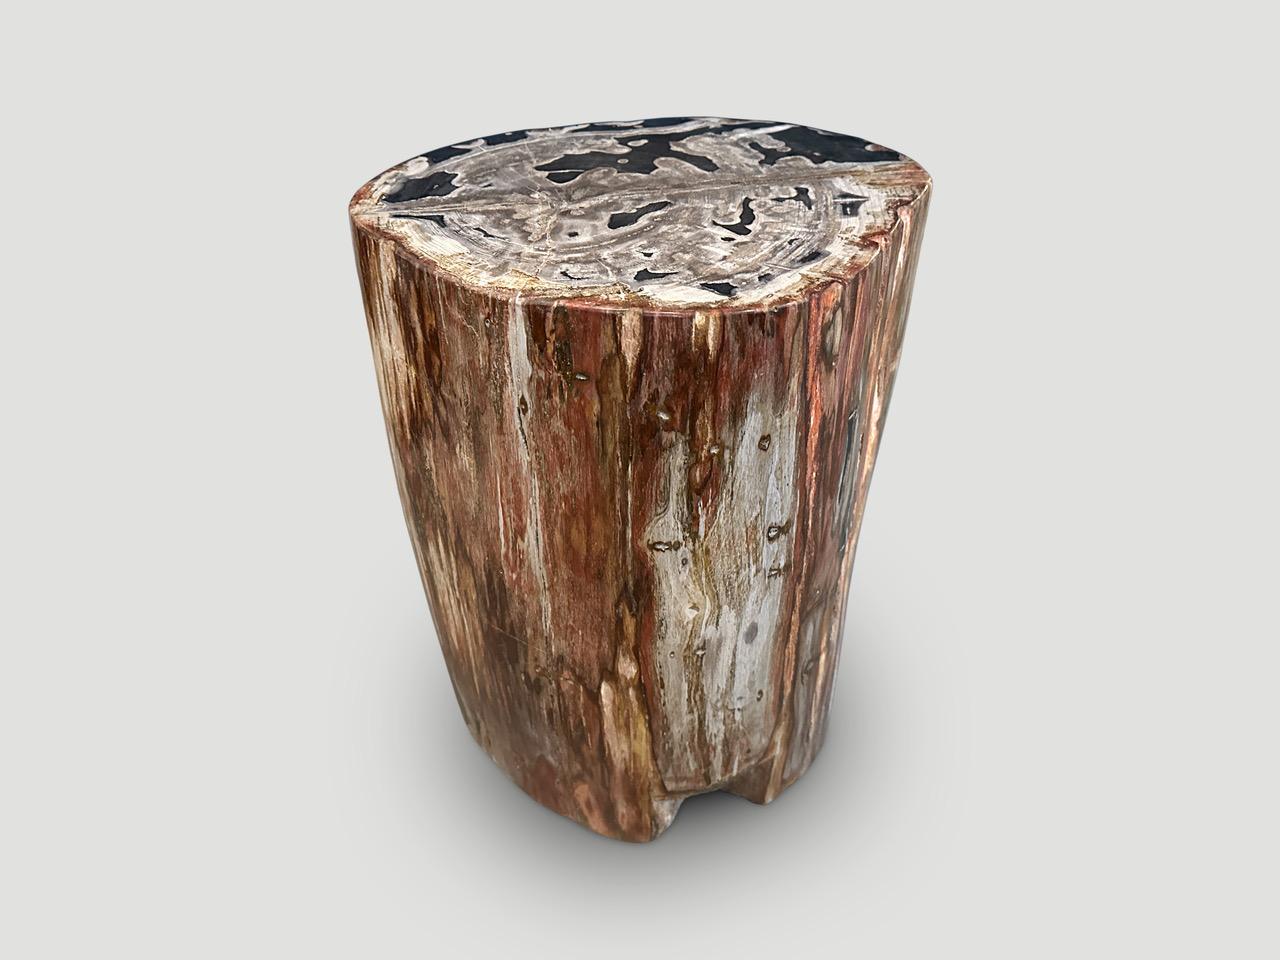 Stunning unusual colors in this beautiful petrified wood side table. It’s fascinating how Mother Nature produces these exquisite 40 million year old petrified teak logs with such contrasting colors and natural patterns throughout. Modern yet with so